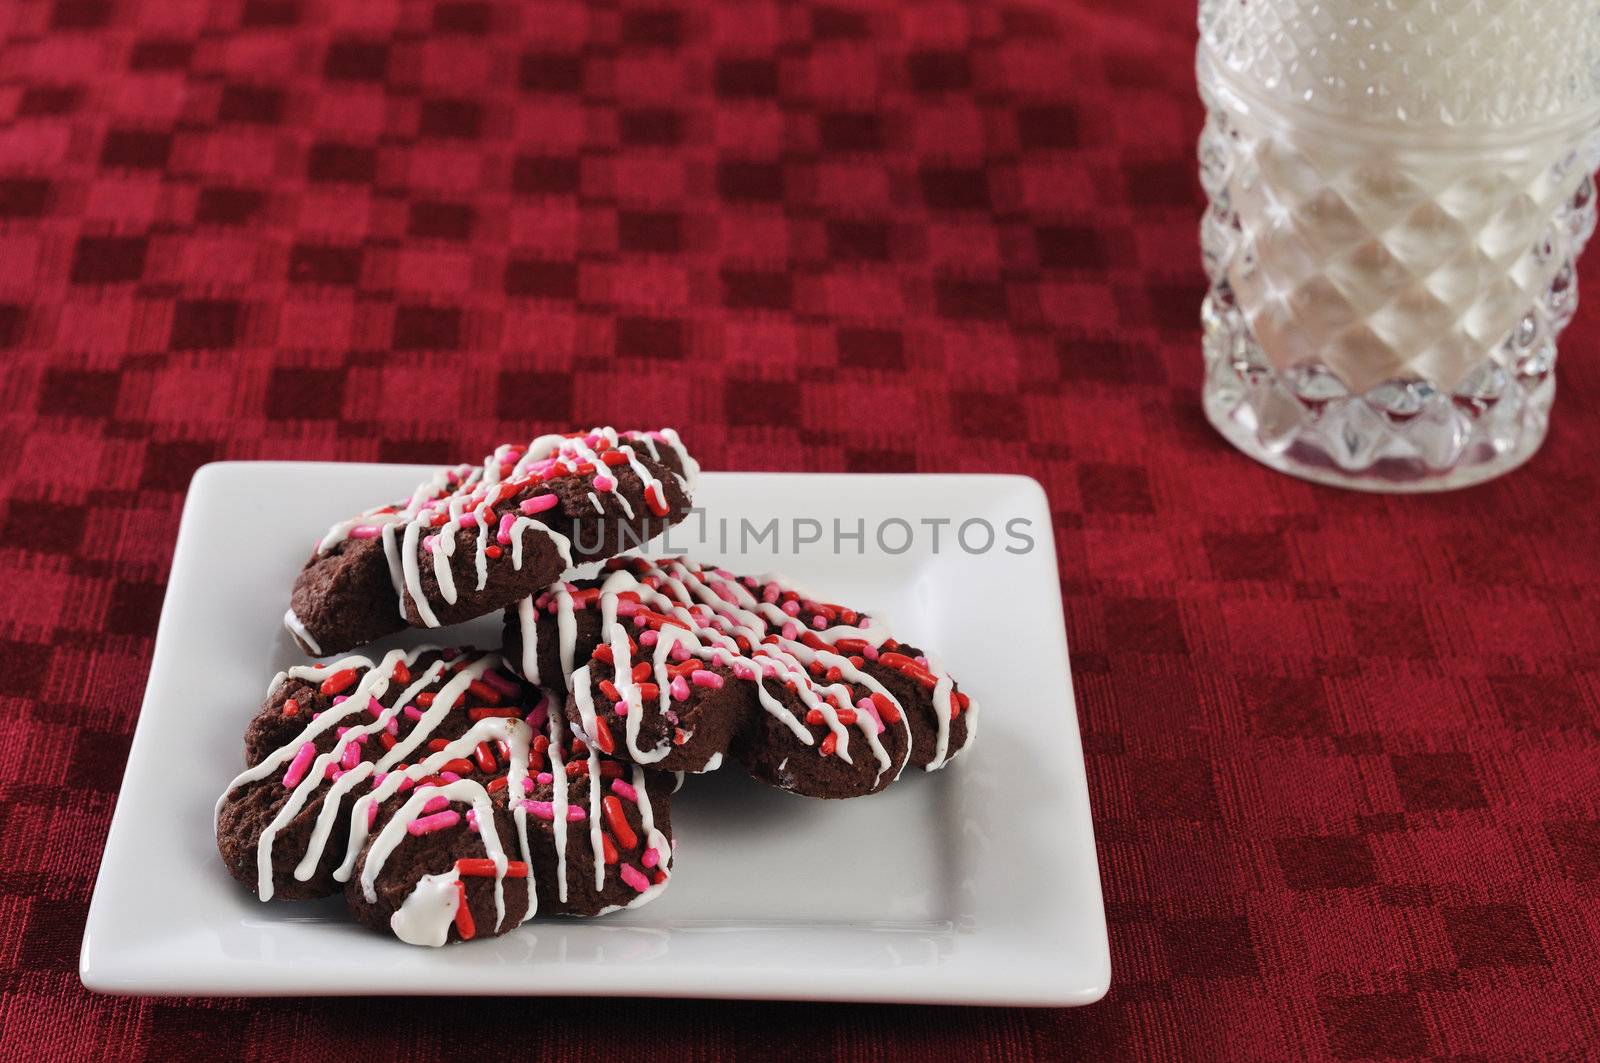 plate of cookies and a glass of milk on a red mat